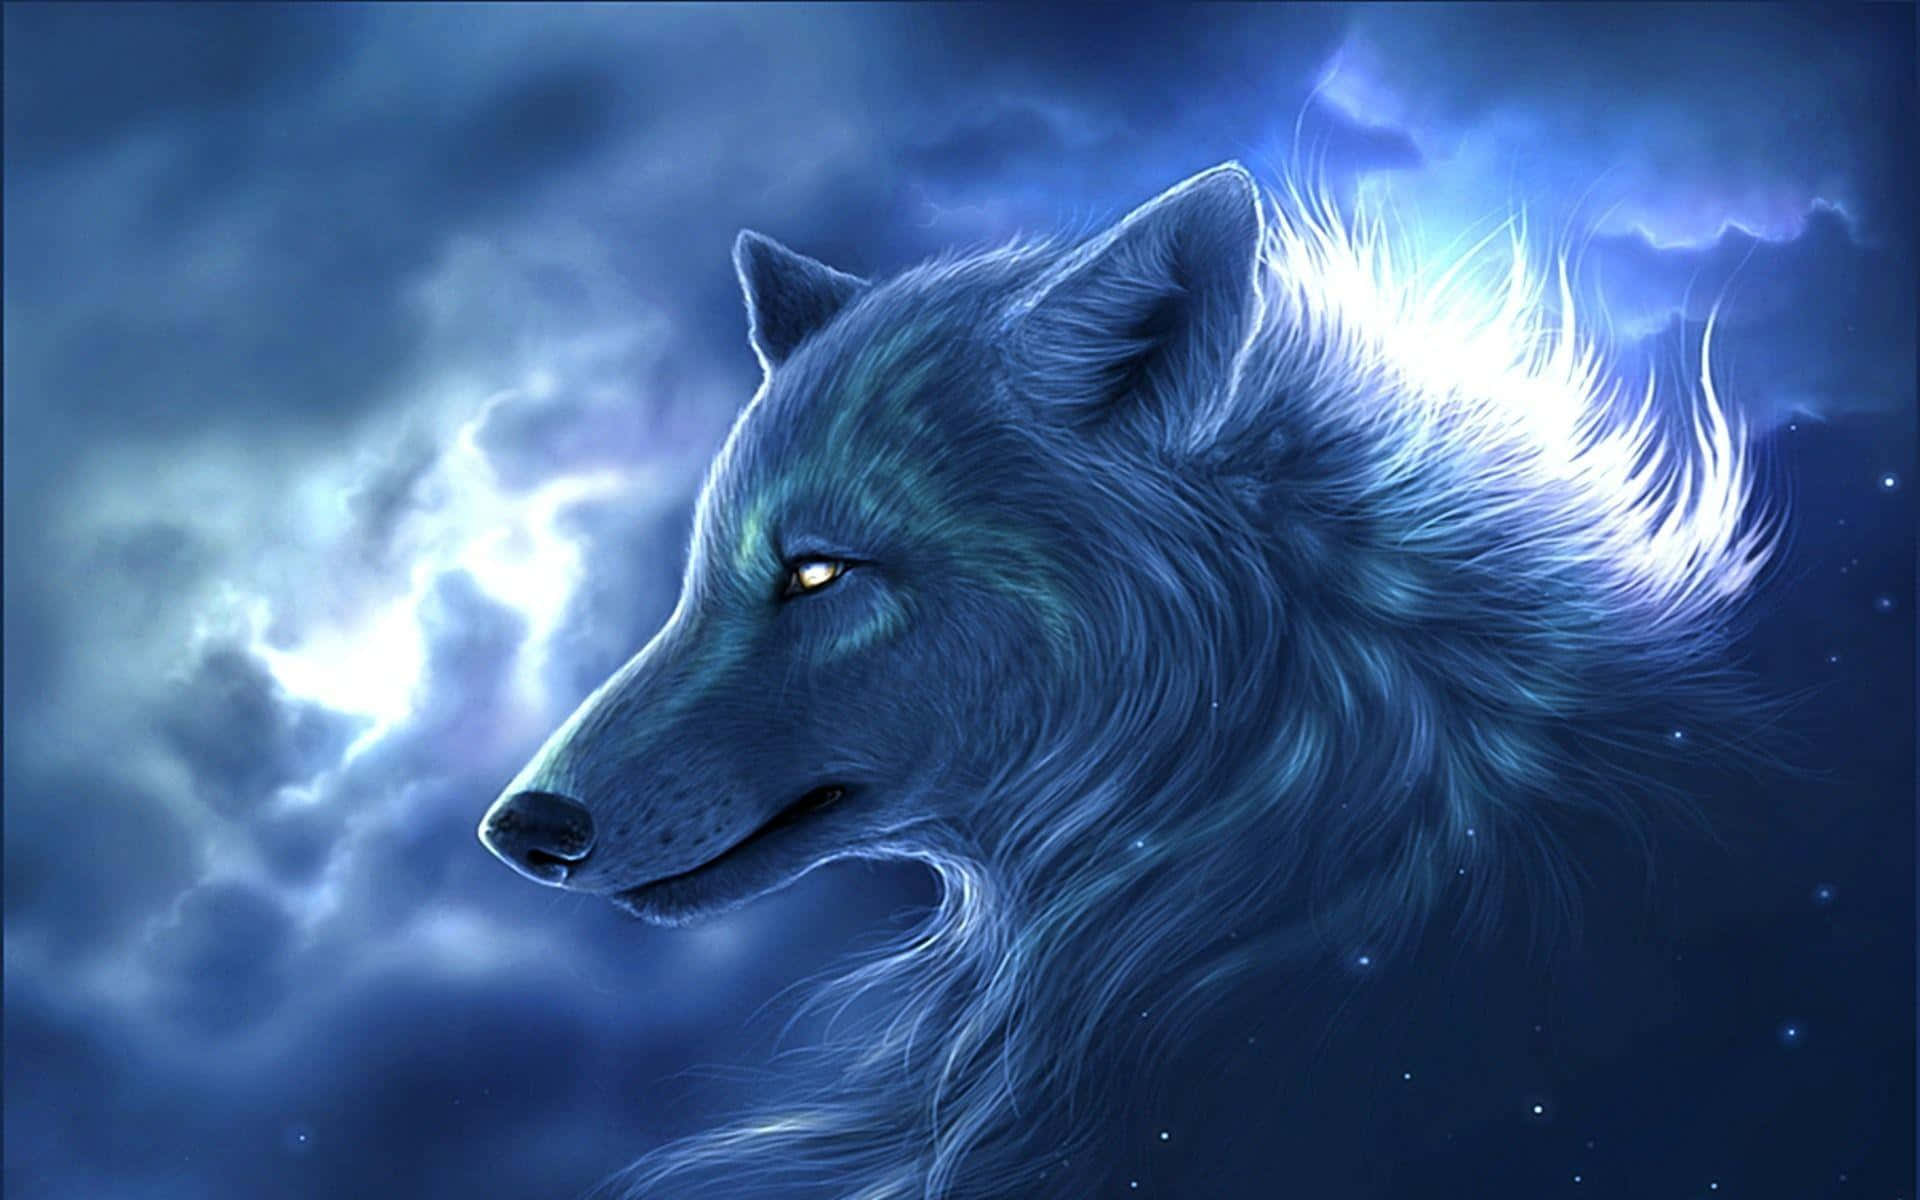 Super Cool Wolf And Clouds Wallpaper